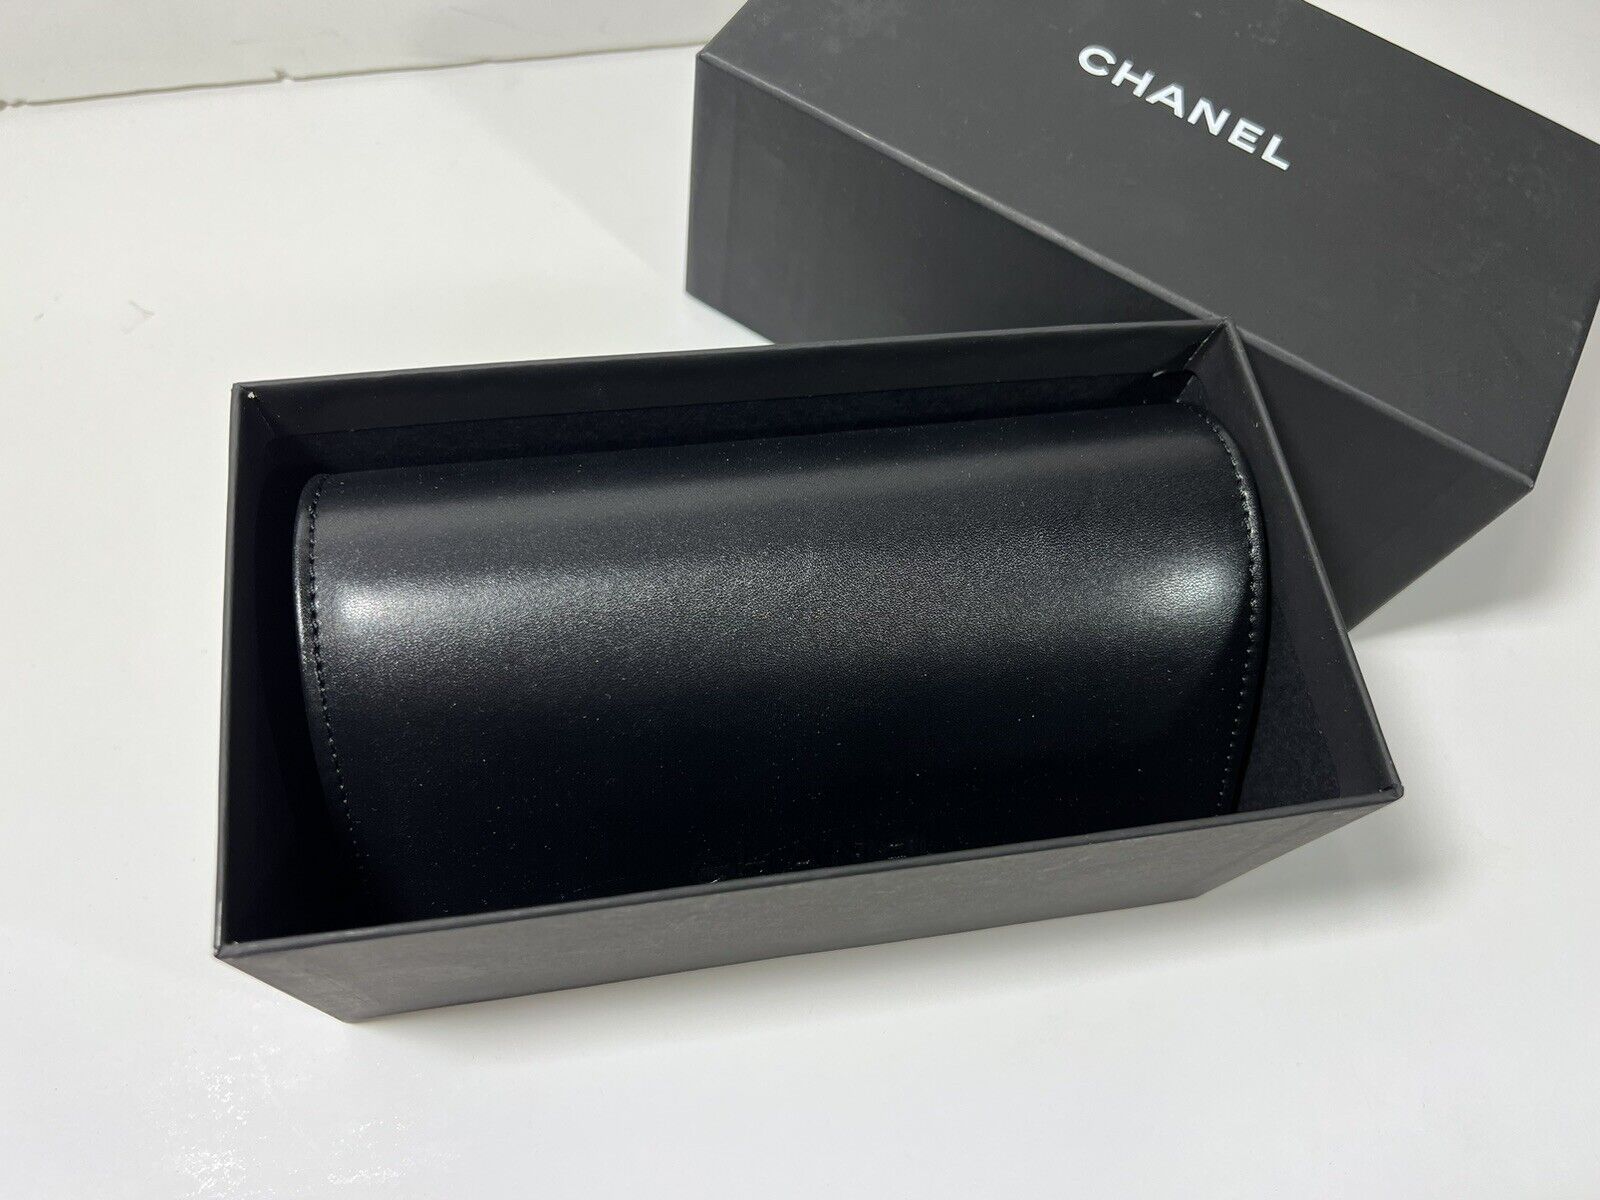 CHANEL Shield Quilted Sunglasses w/ Case & Box Italy 6009 c.877/13 125  Designer